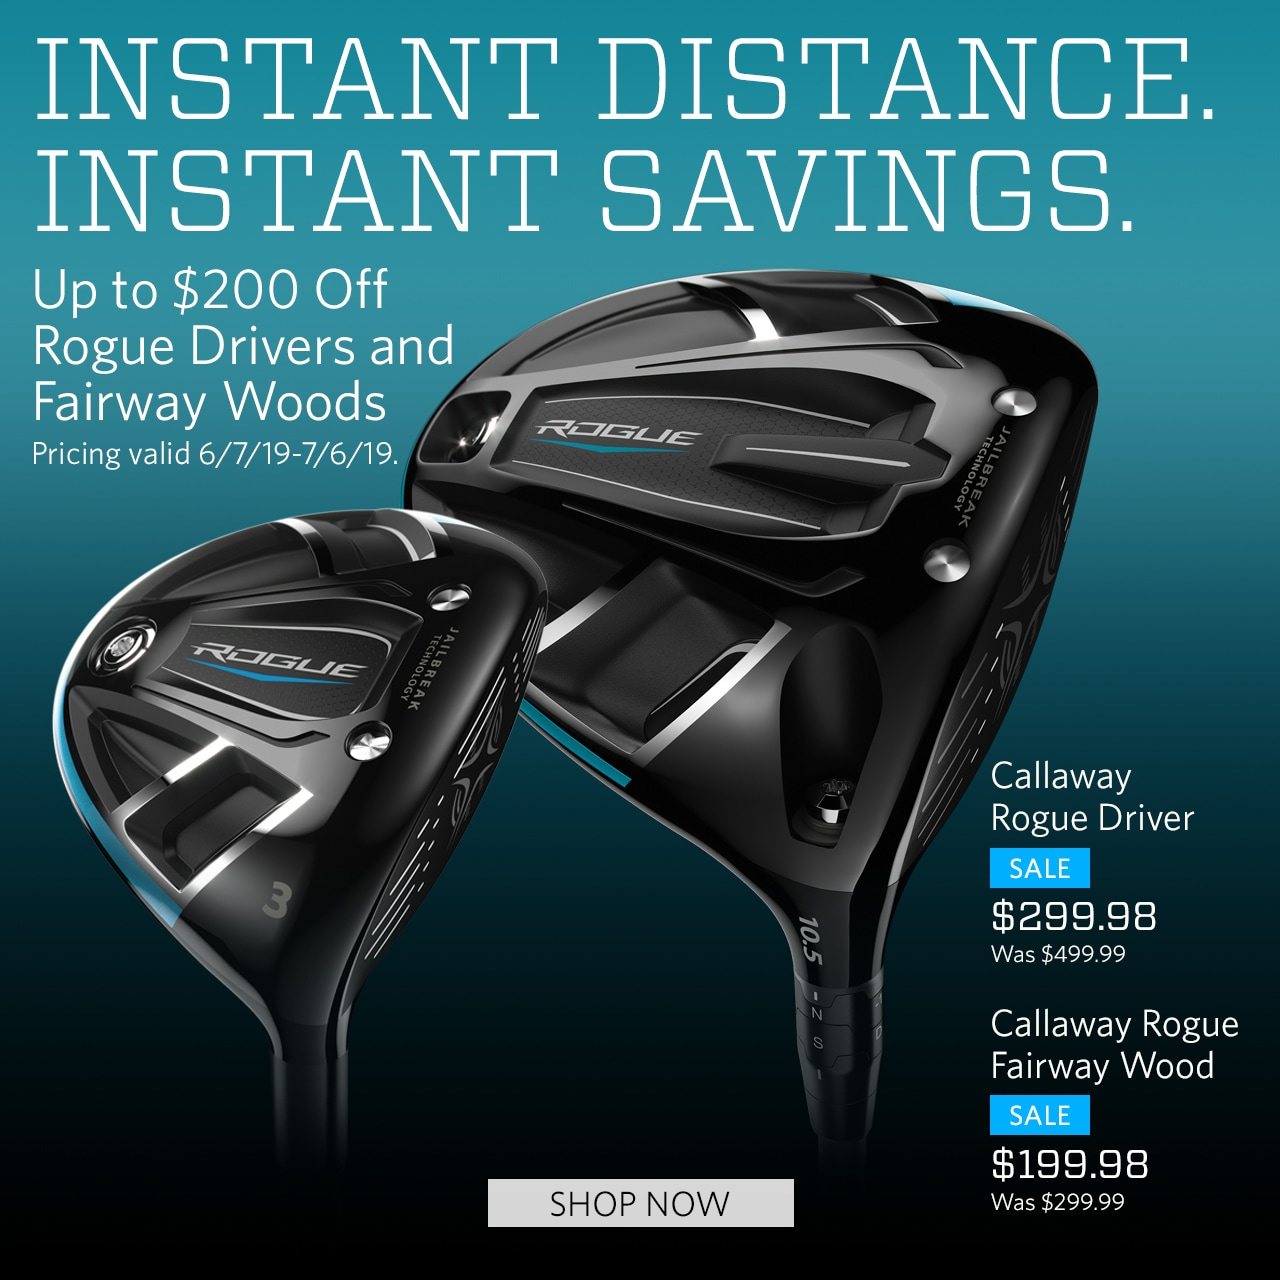 Instant Distance. Instant Savings. Sale up to $200 off Rogue Drivers and Fairway Woods. Pricing valid 6/7/19 to 7/6/19.